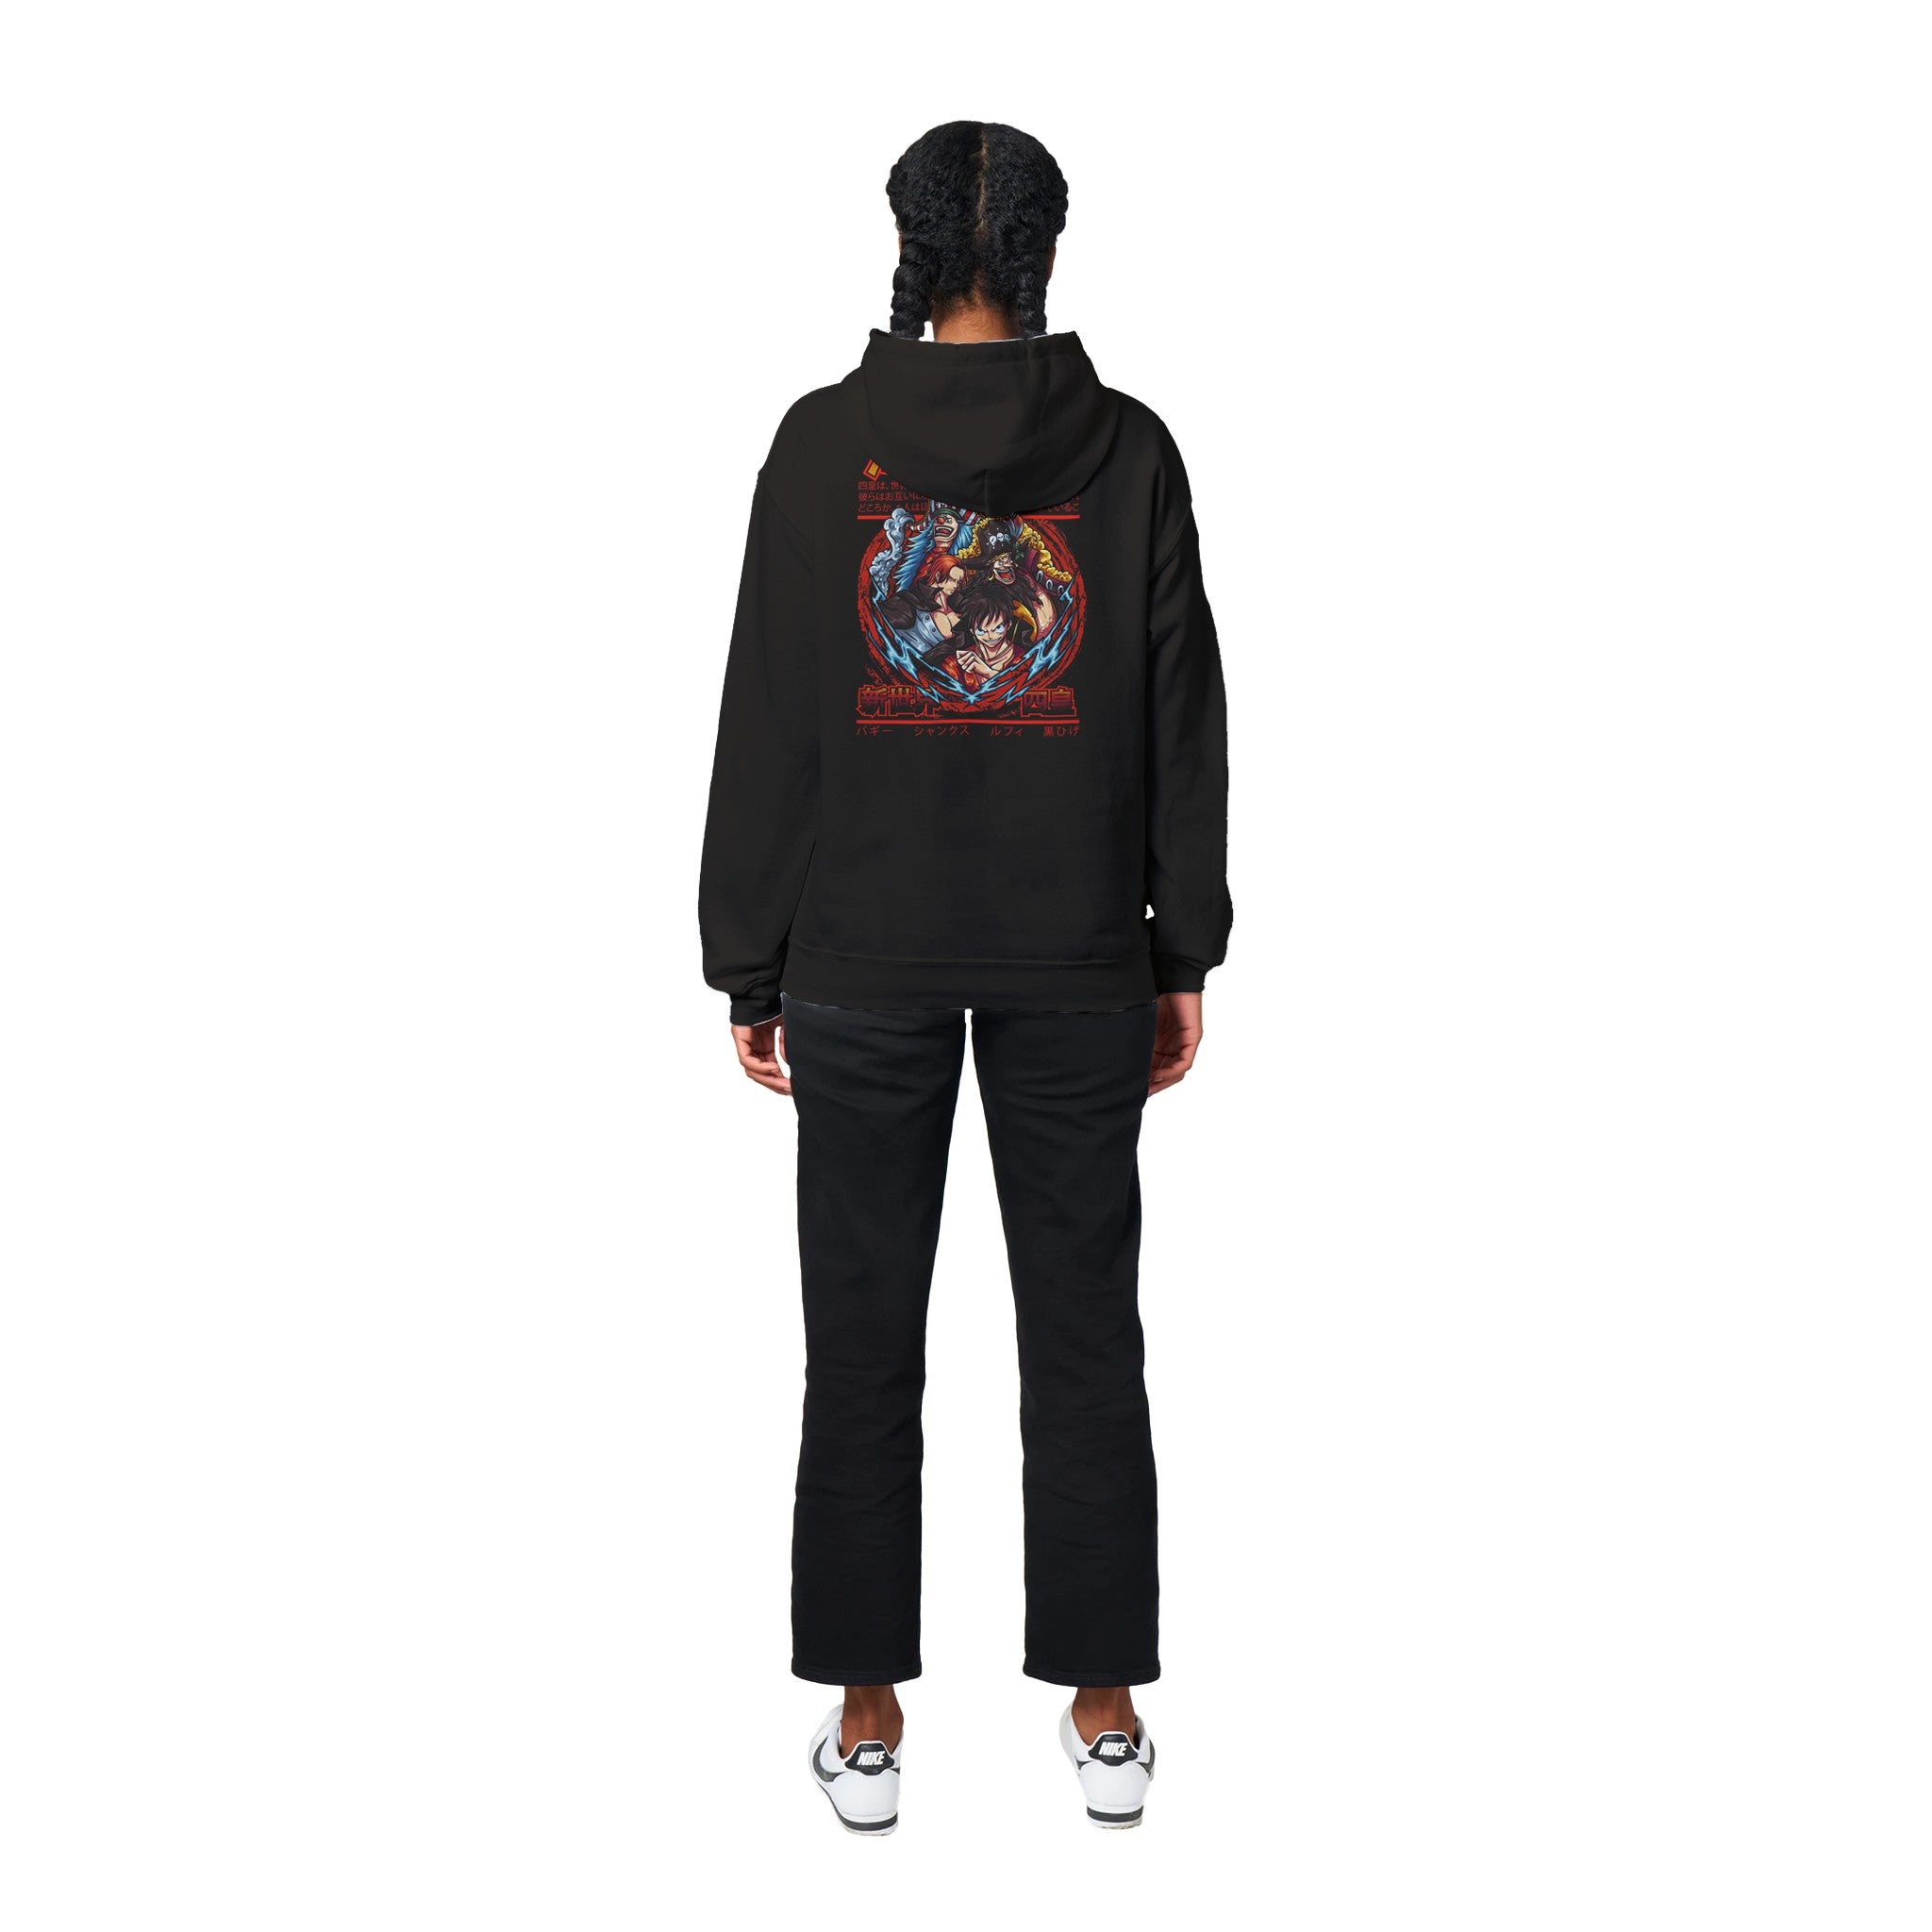 shop and buy One Piece Luffy anime clothing hoodie